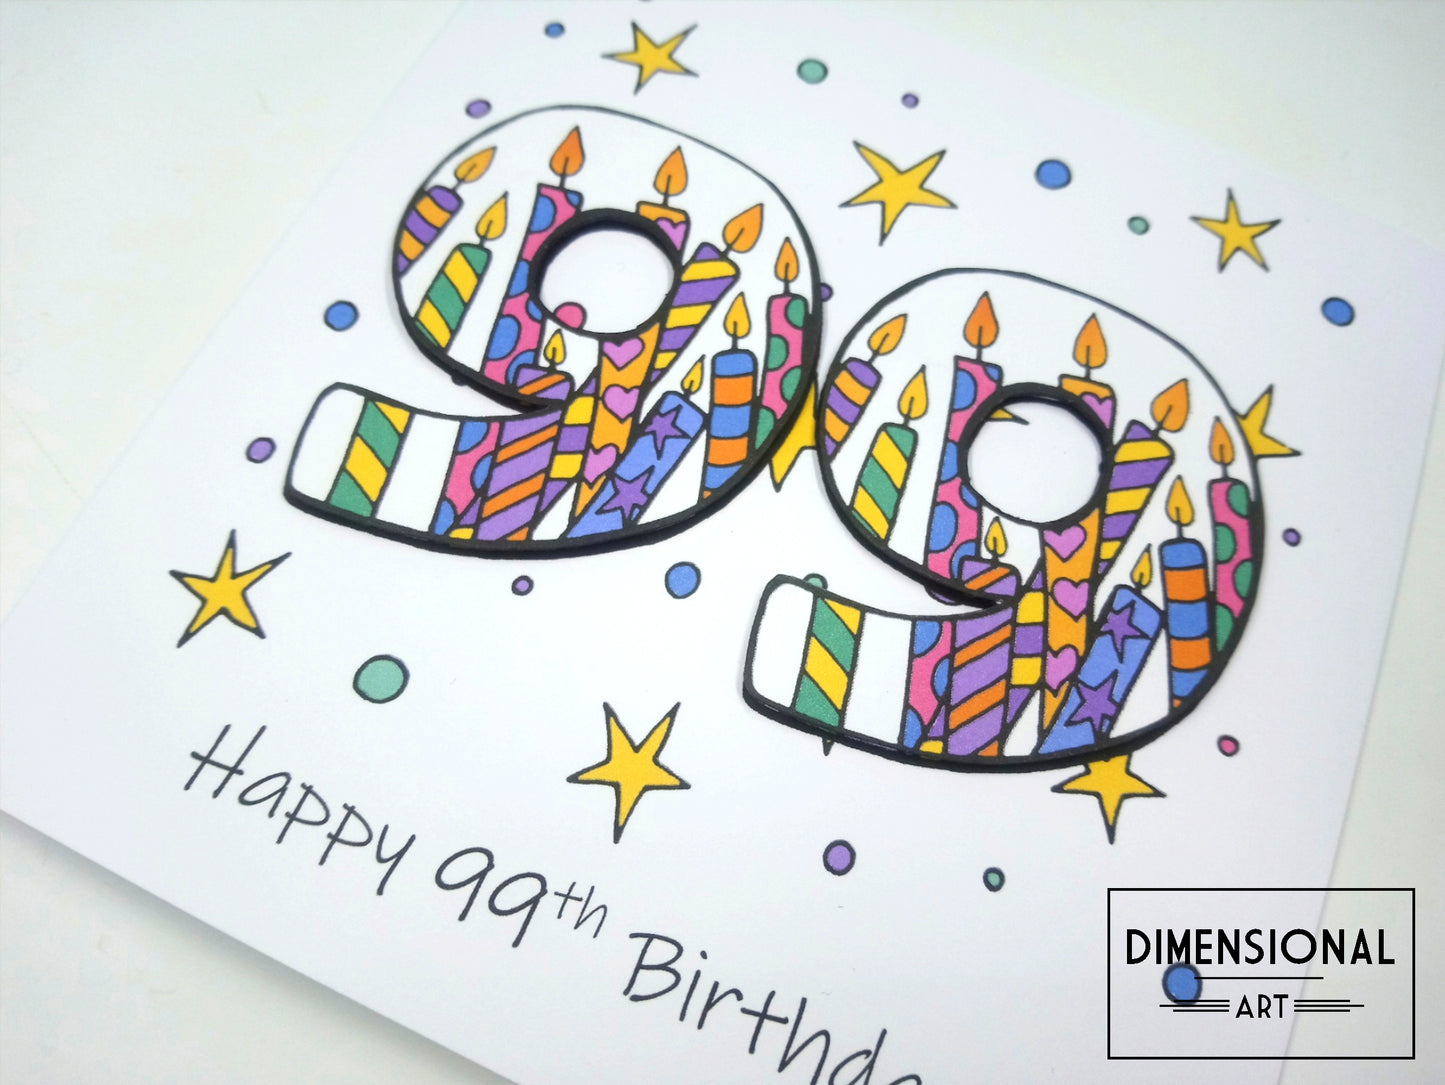 99th Number Candles Birthday Card